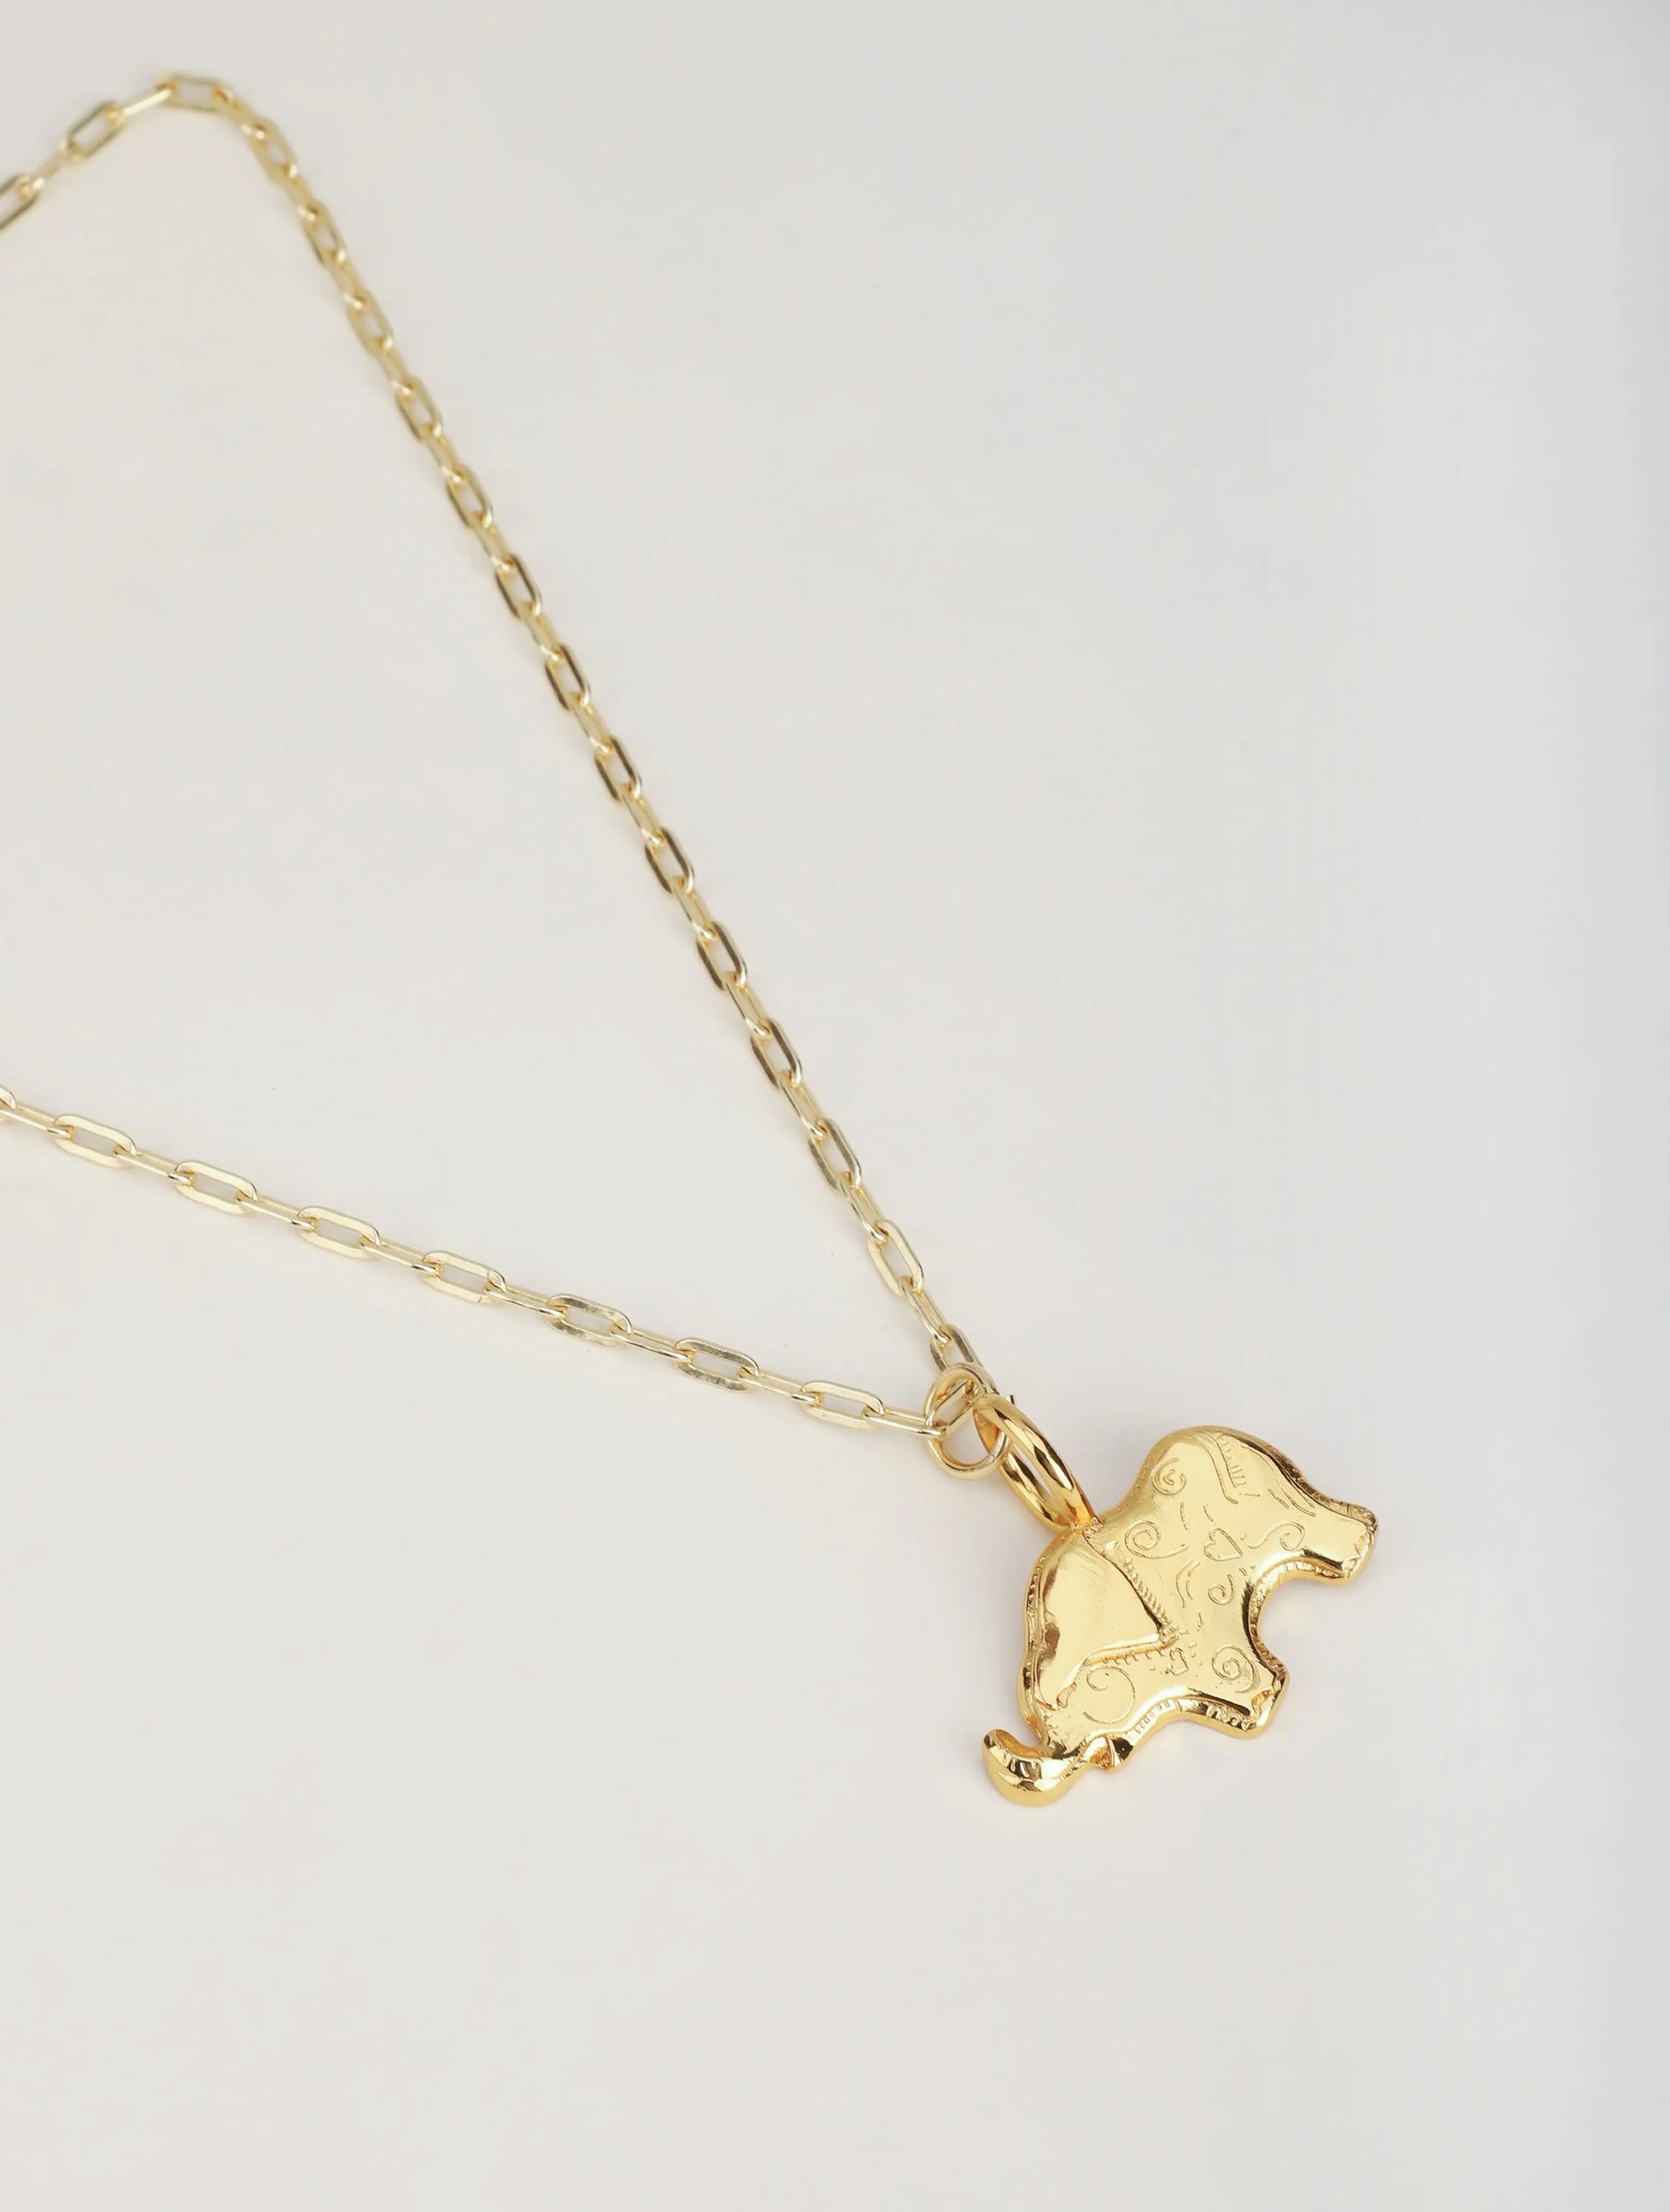 Elephant Charm Necklace Cackle With Love